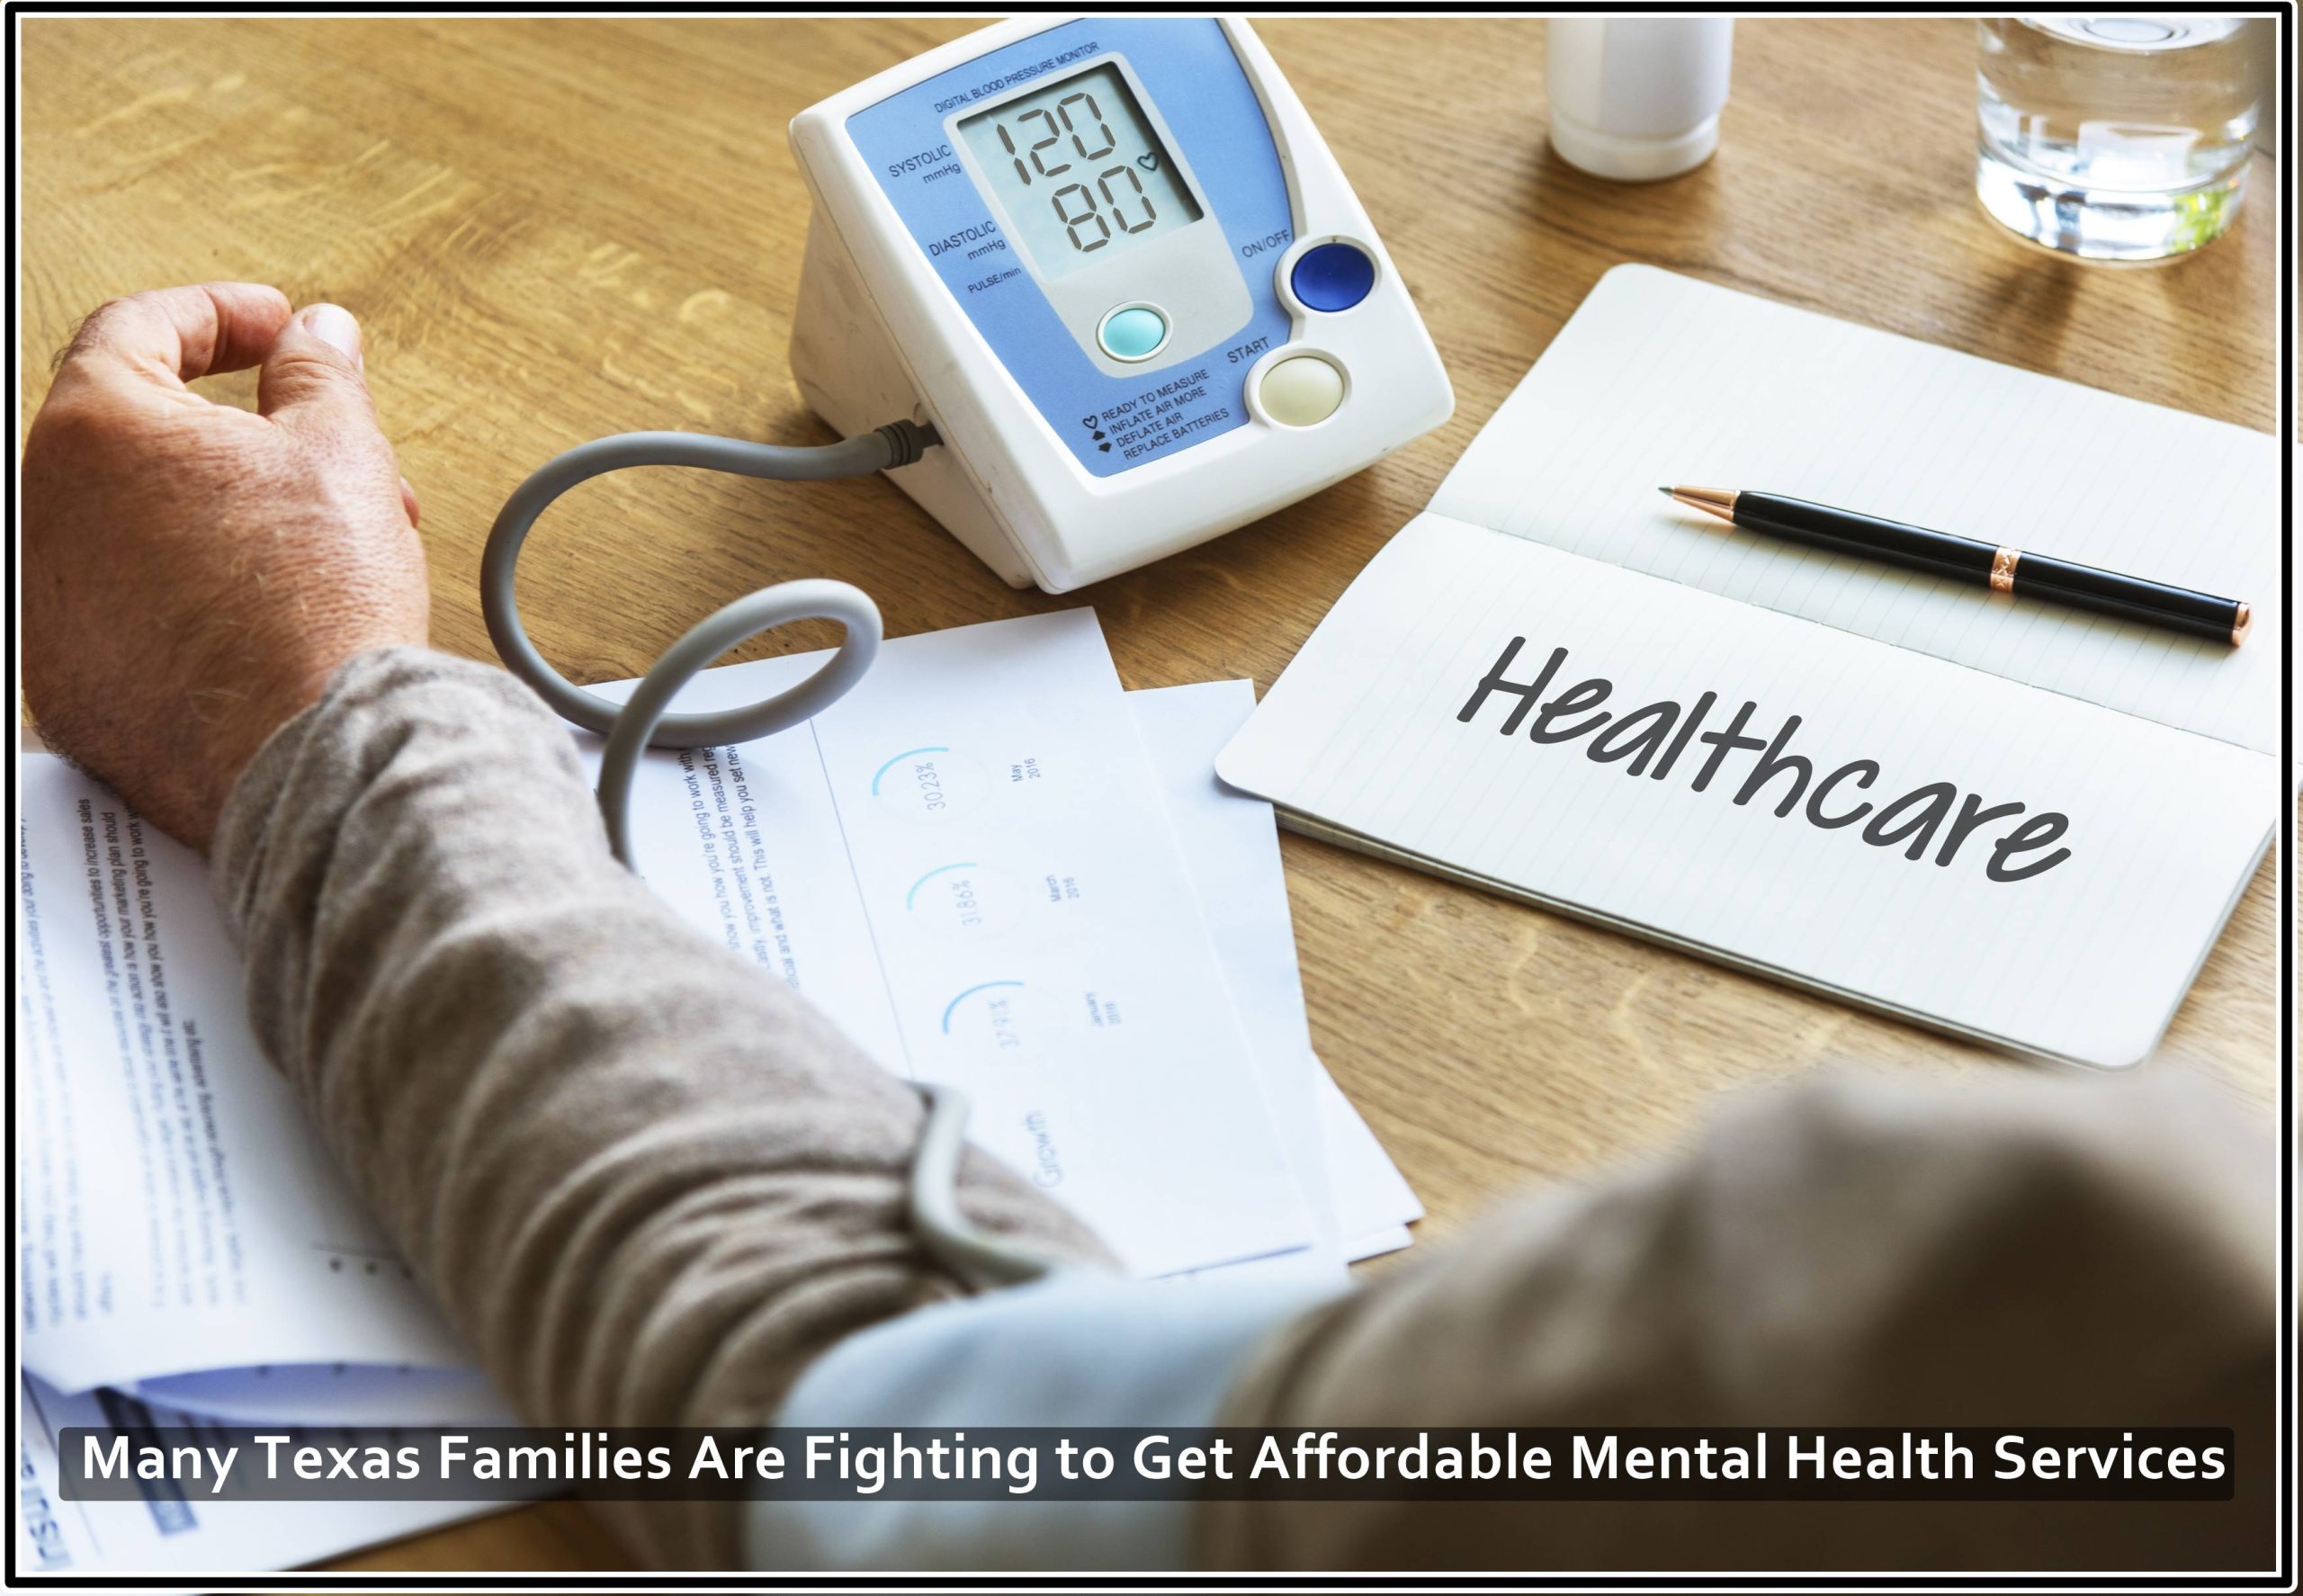 Many Texas Families Are Fighting to Get Affordable Mental Health Services